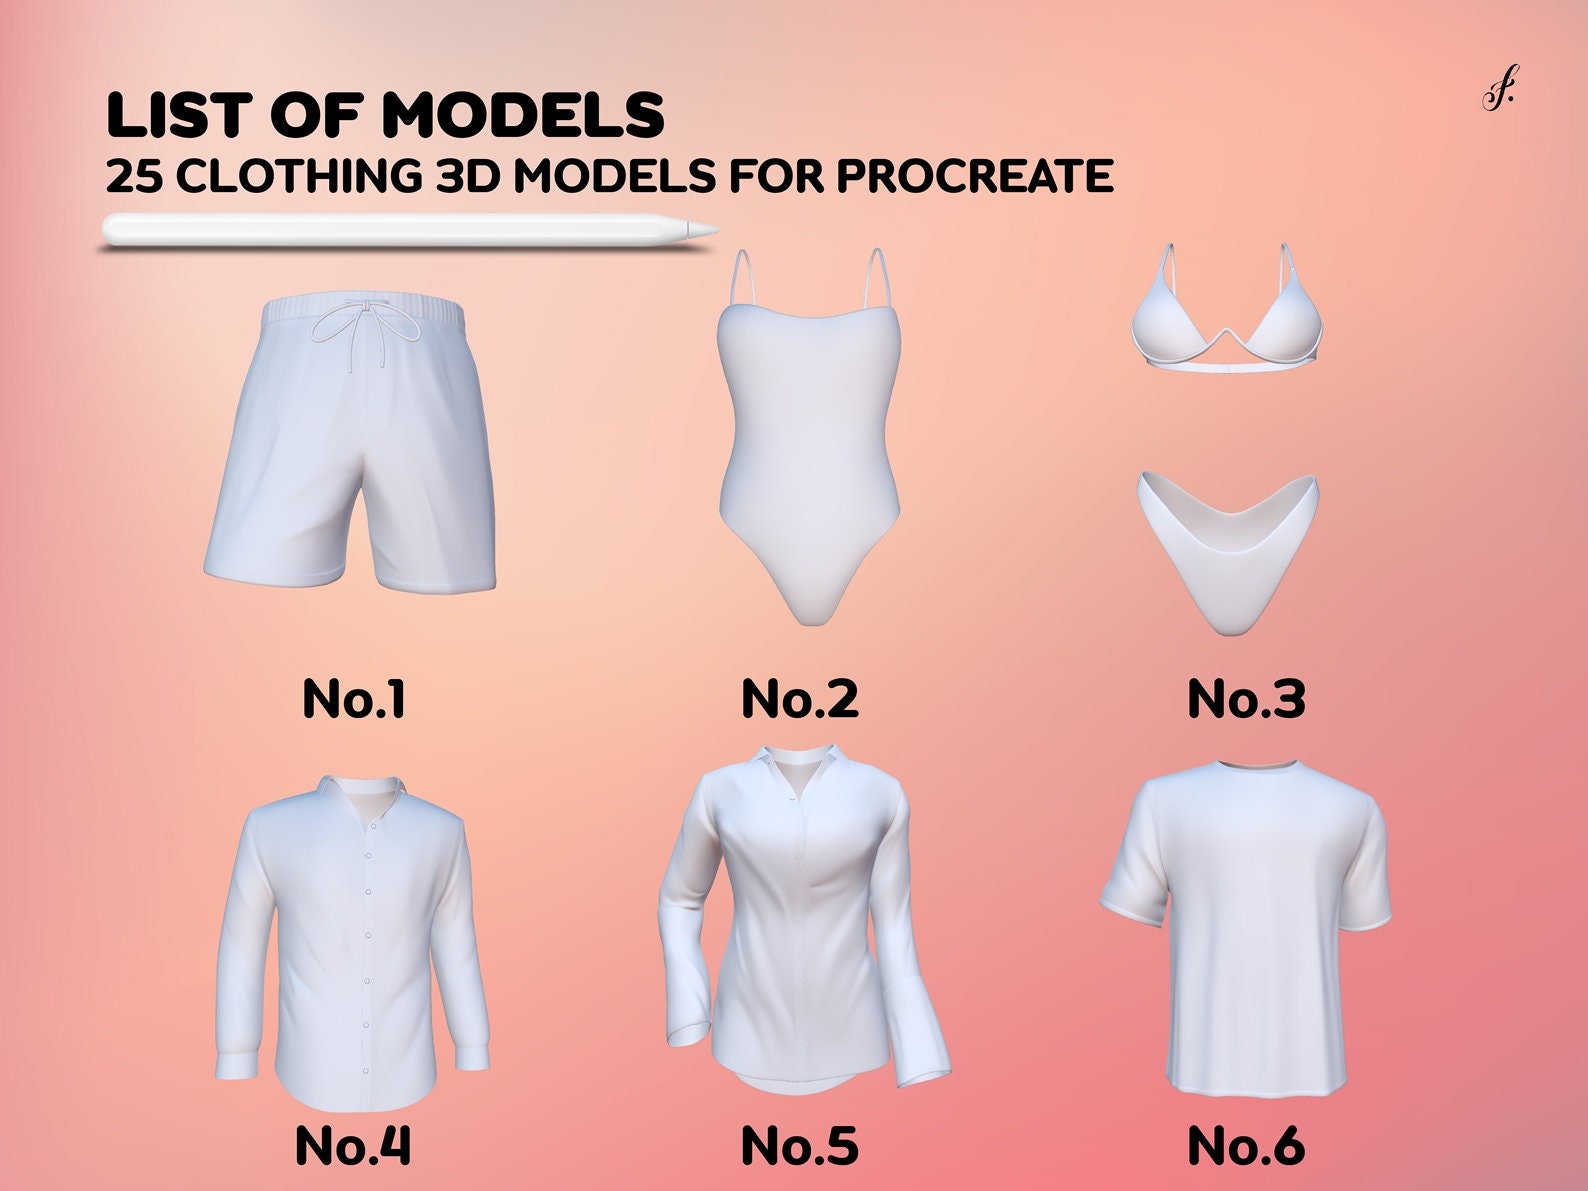 Clothing Previewer and 3D drawing (e.g. Procreate 3D) - Community Resources  - Developer Forum